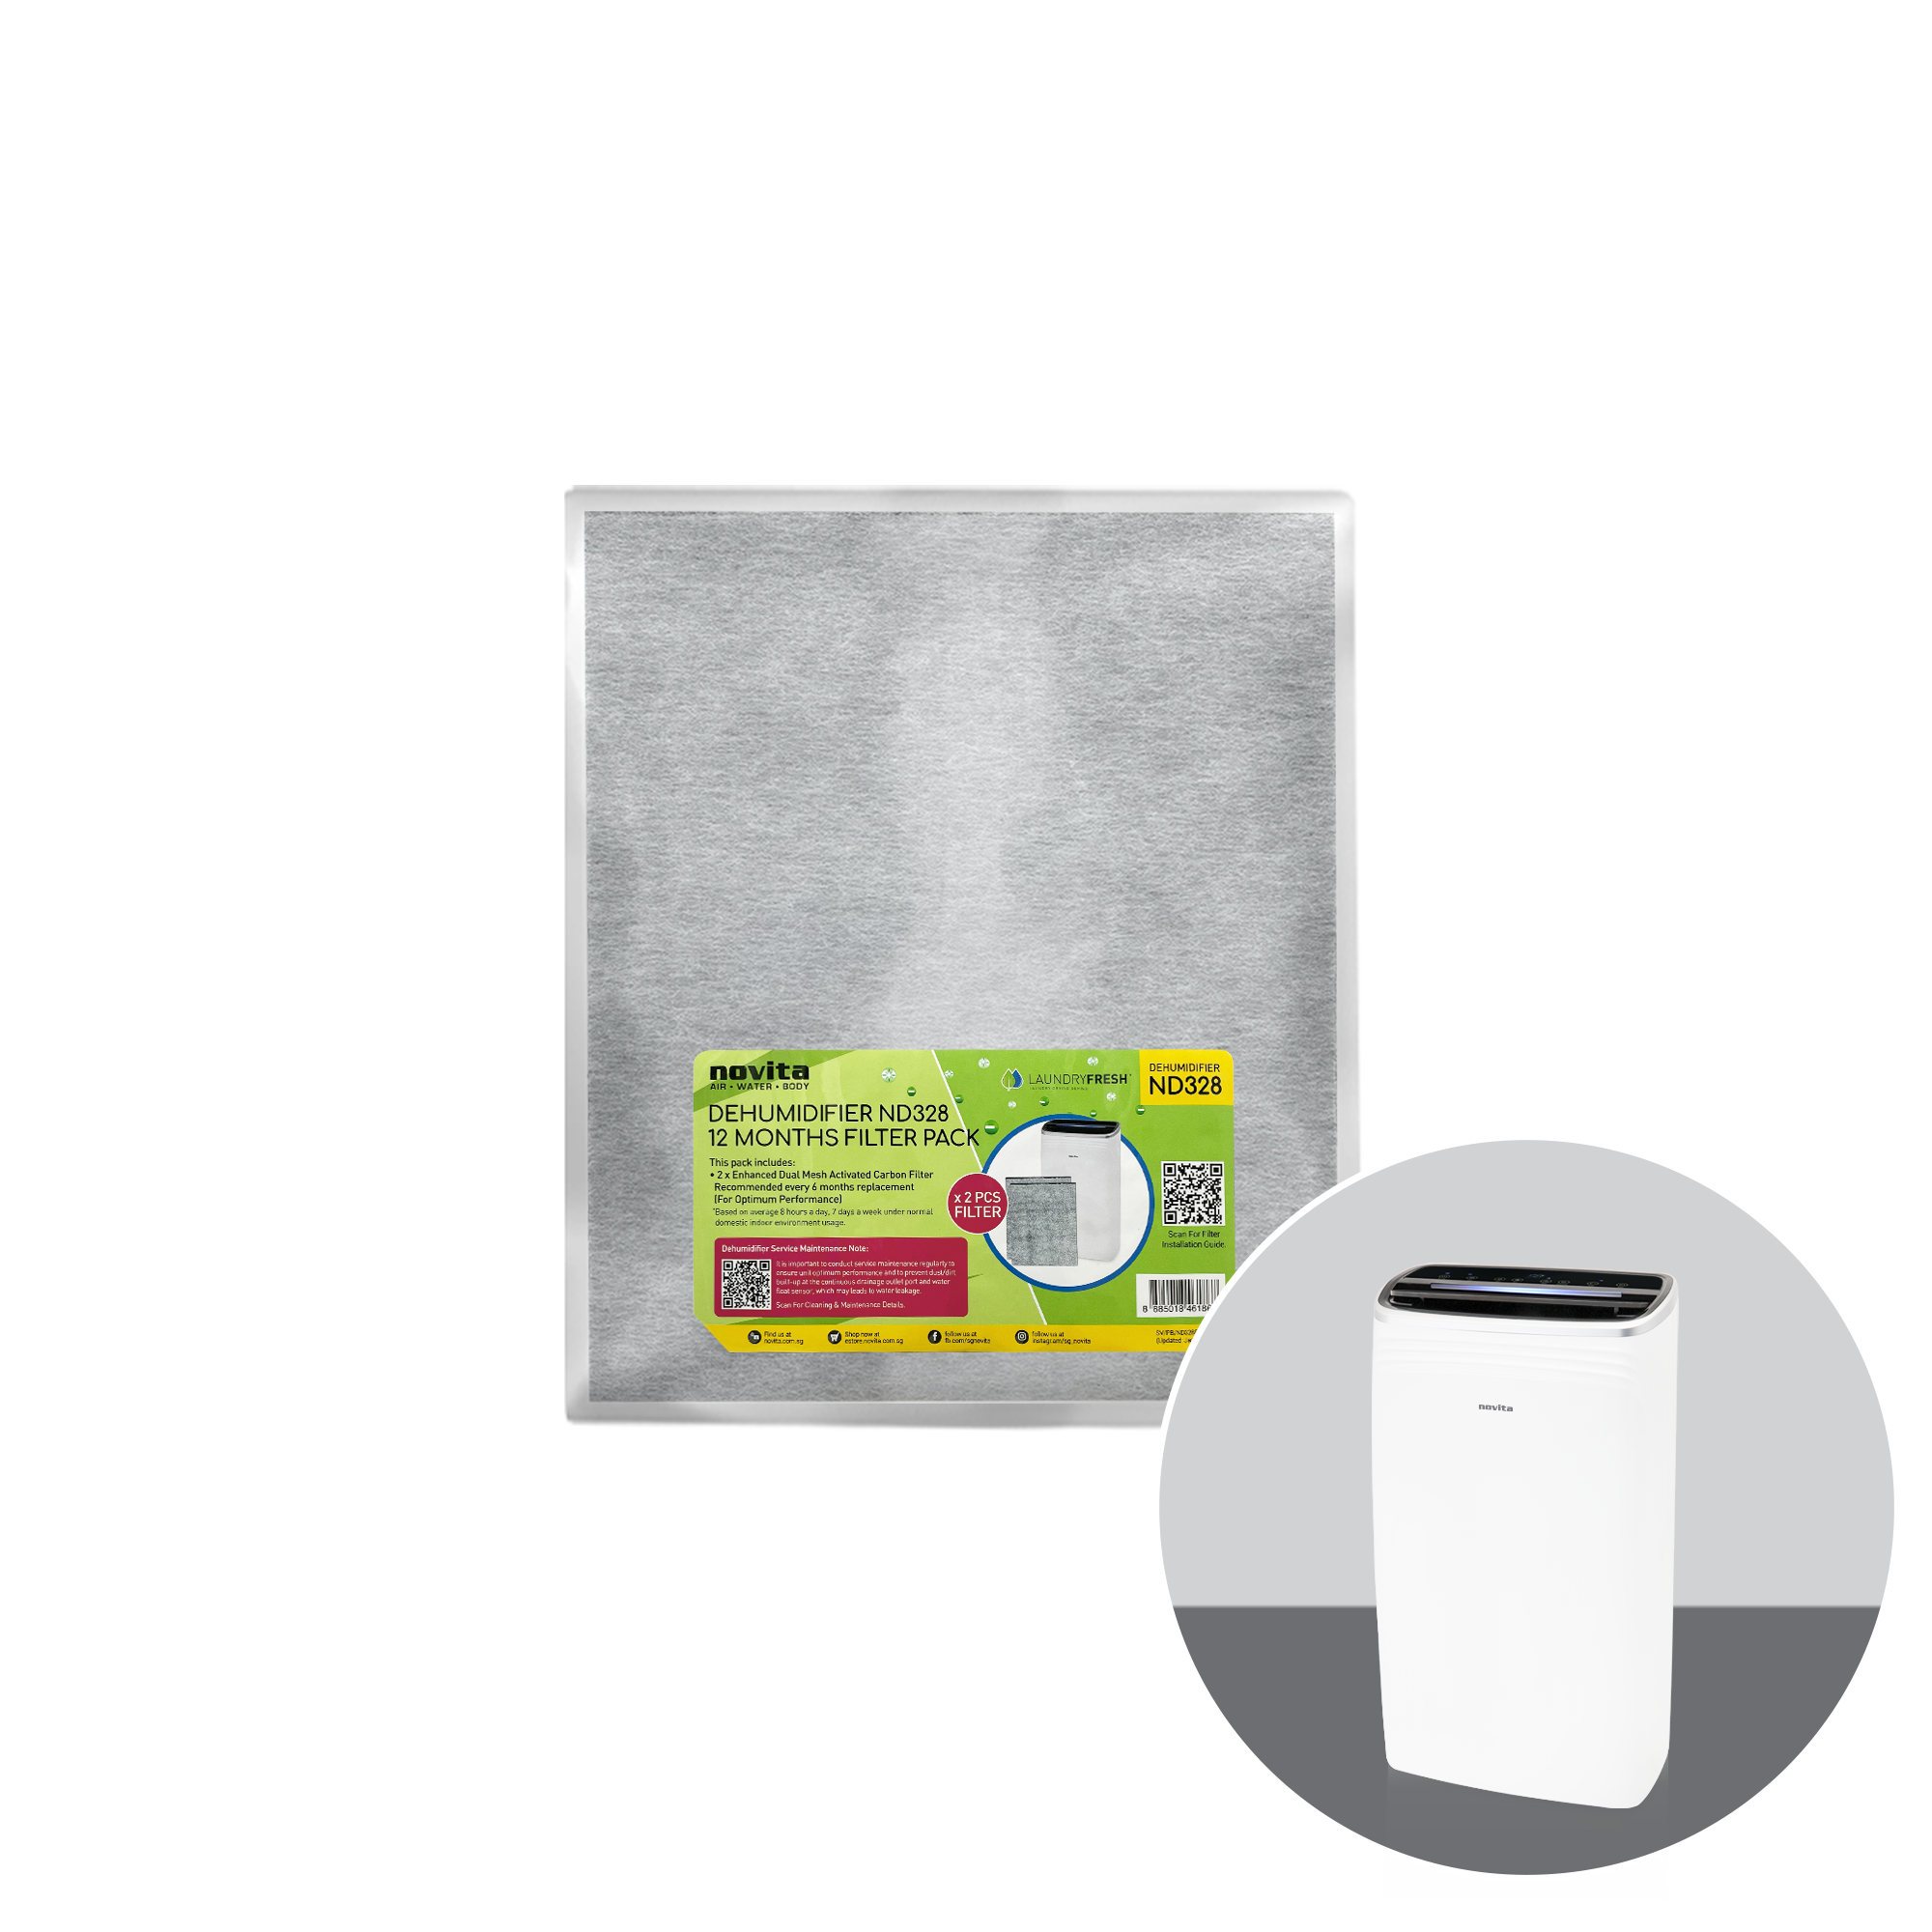 A bag of Filter Pack - For Dehumidifier ND328 (2 Pcs) by novita with a white box next to it.